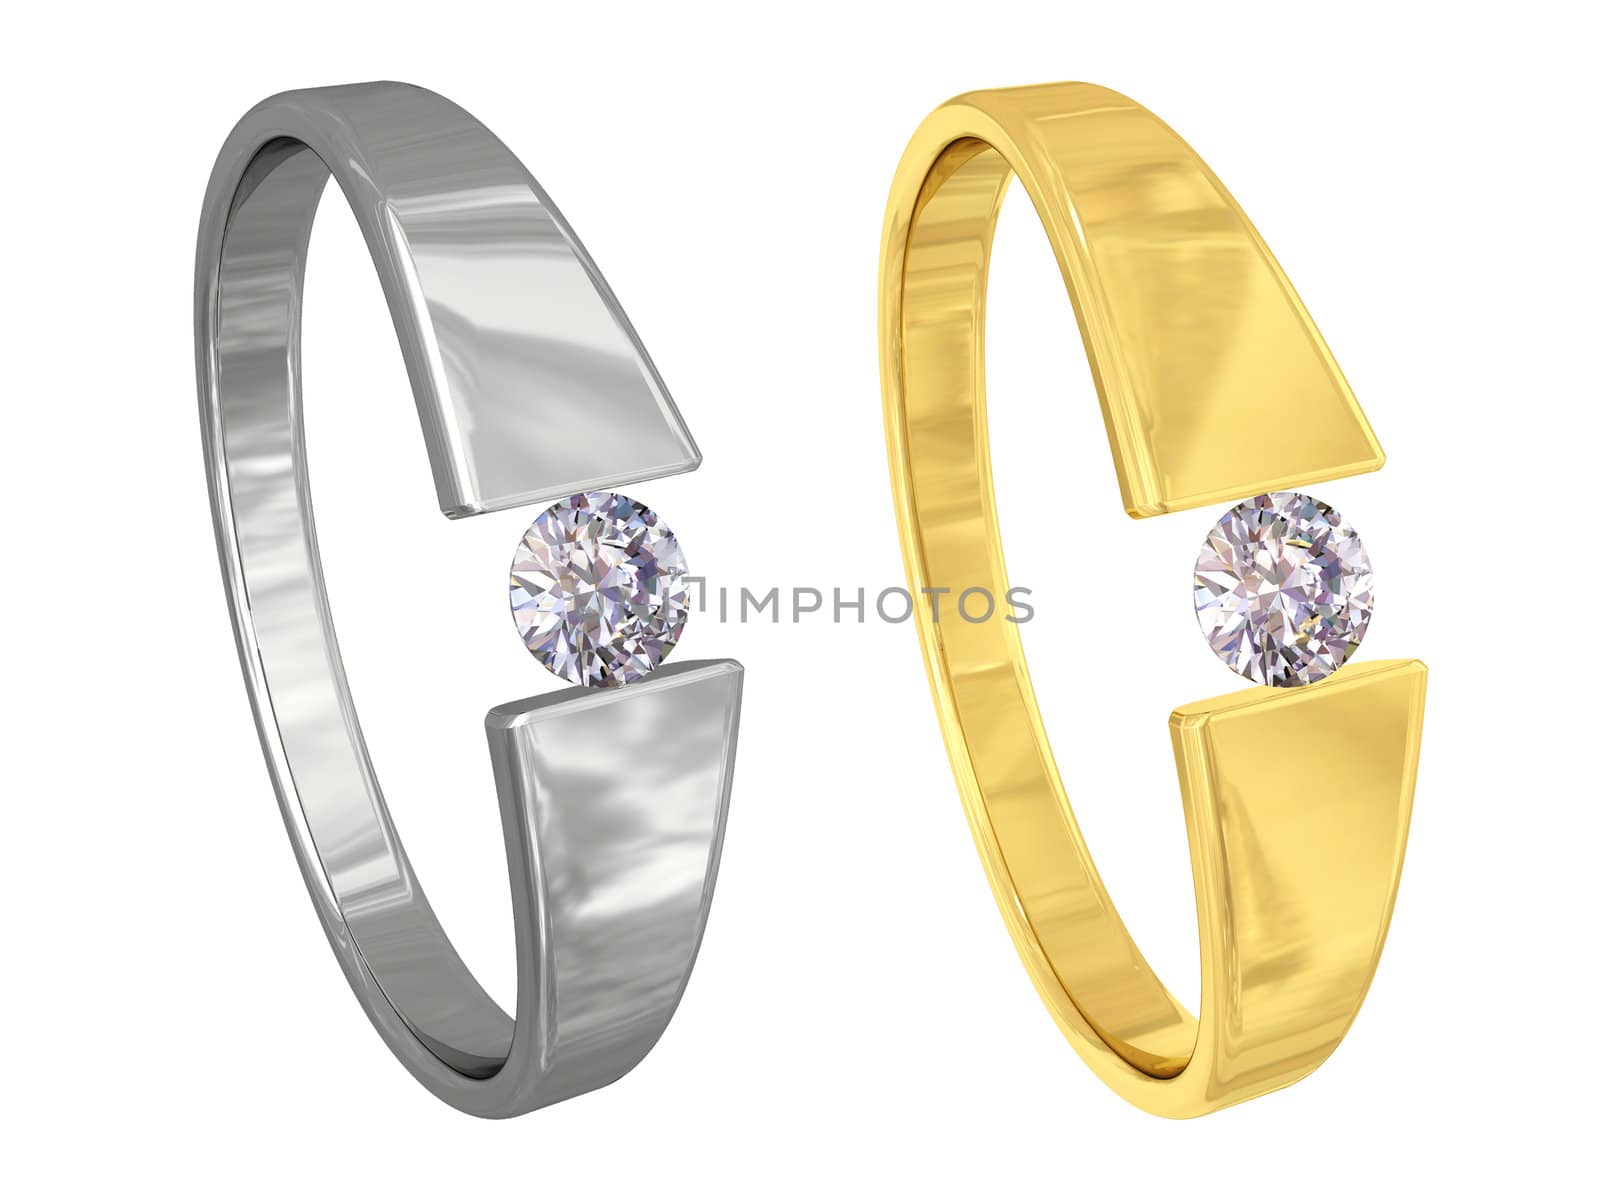 Gold and silver rings with diamonds by oneo